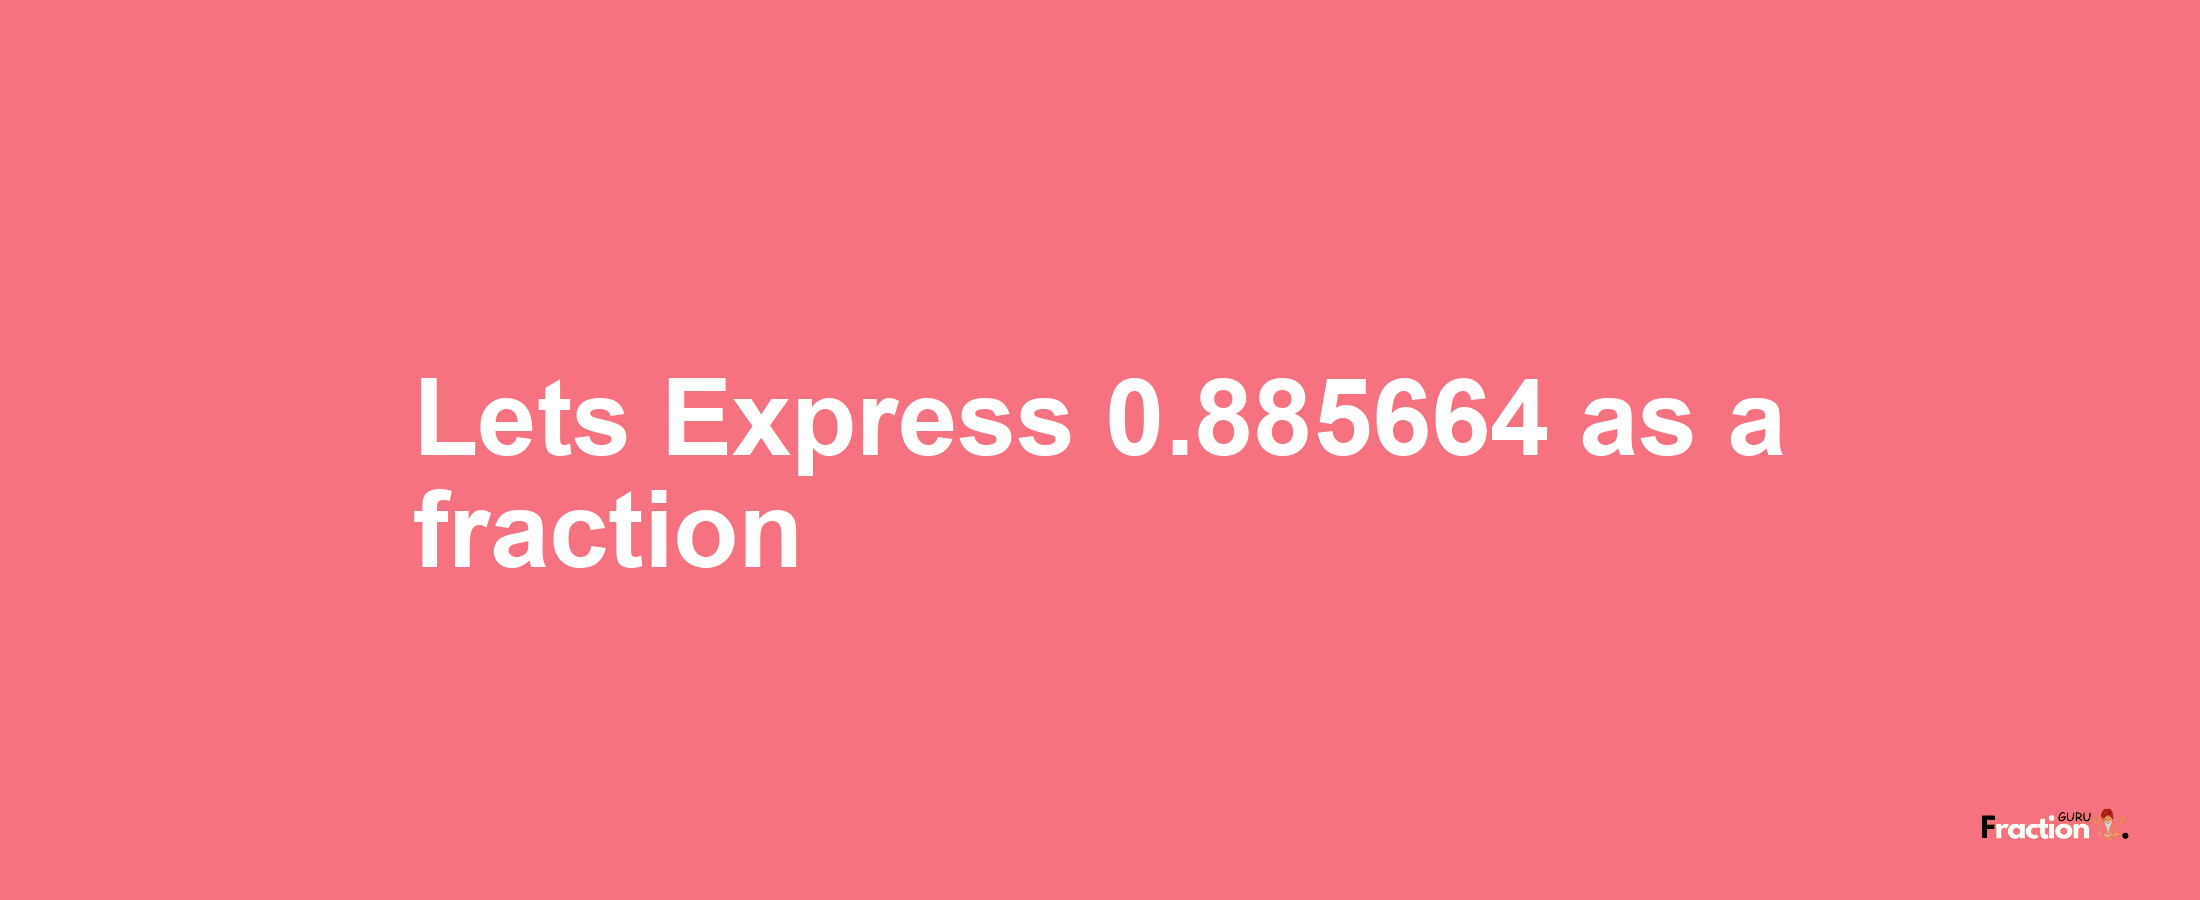 Lets Express 0.885664 as afraction